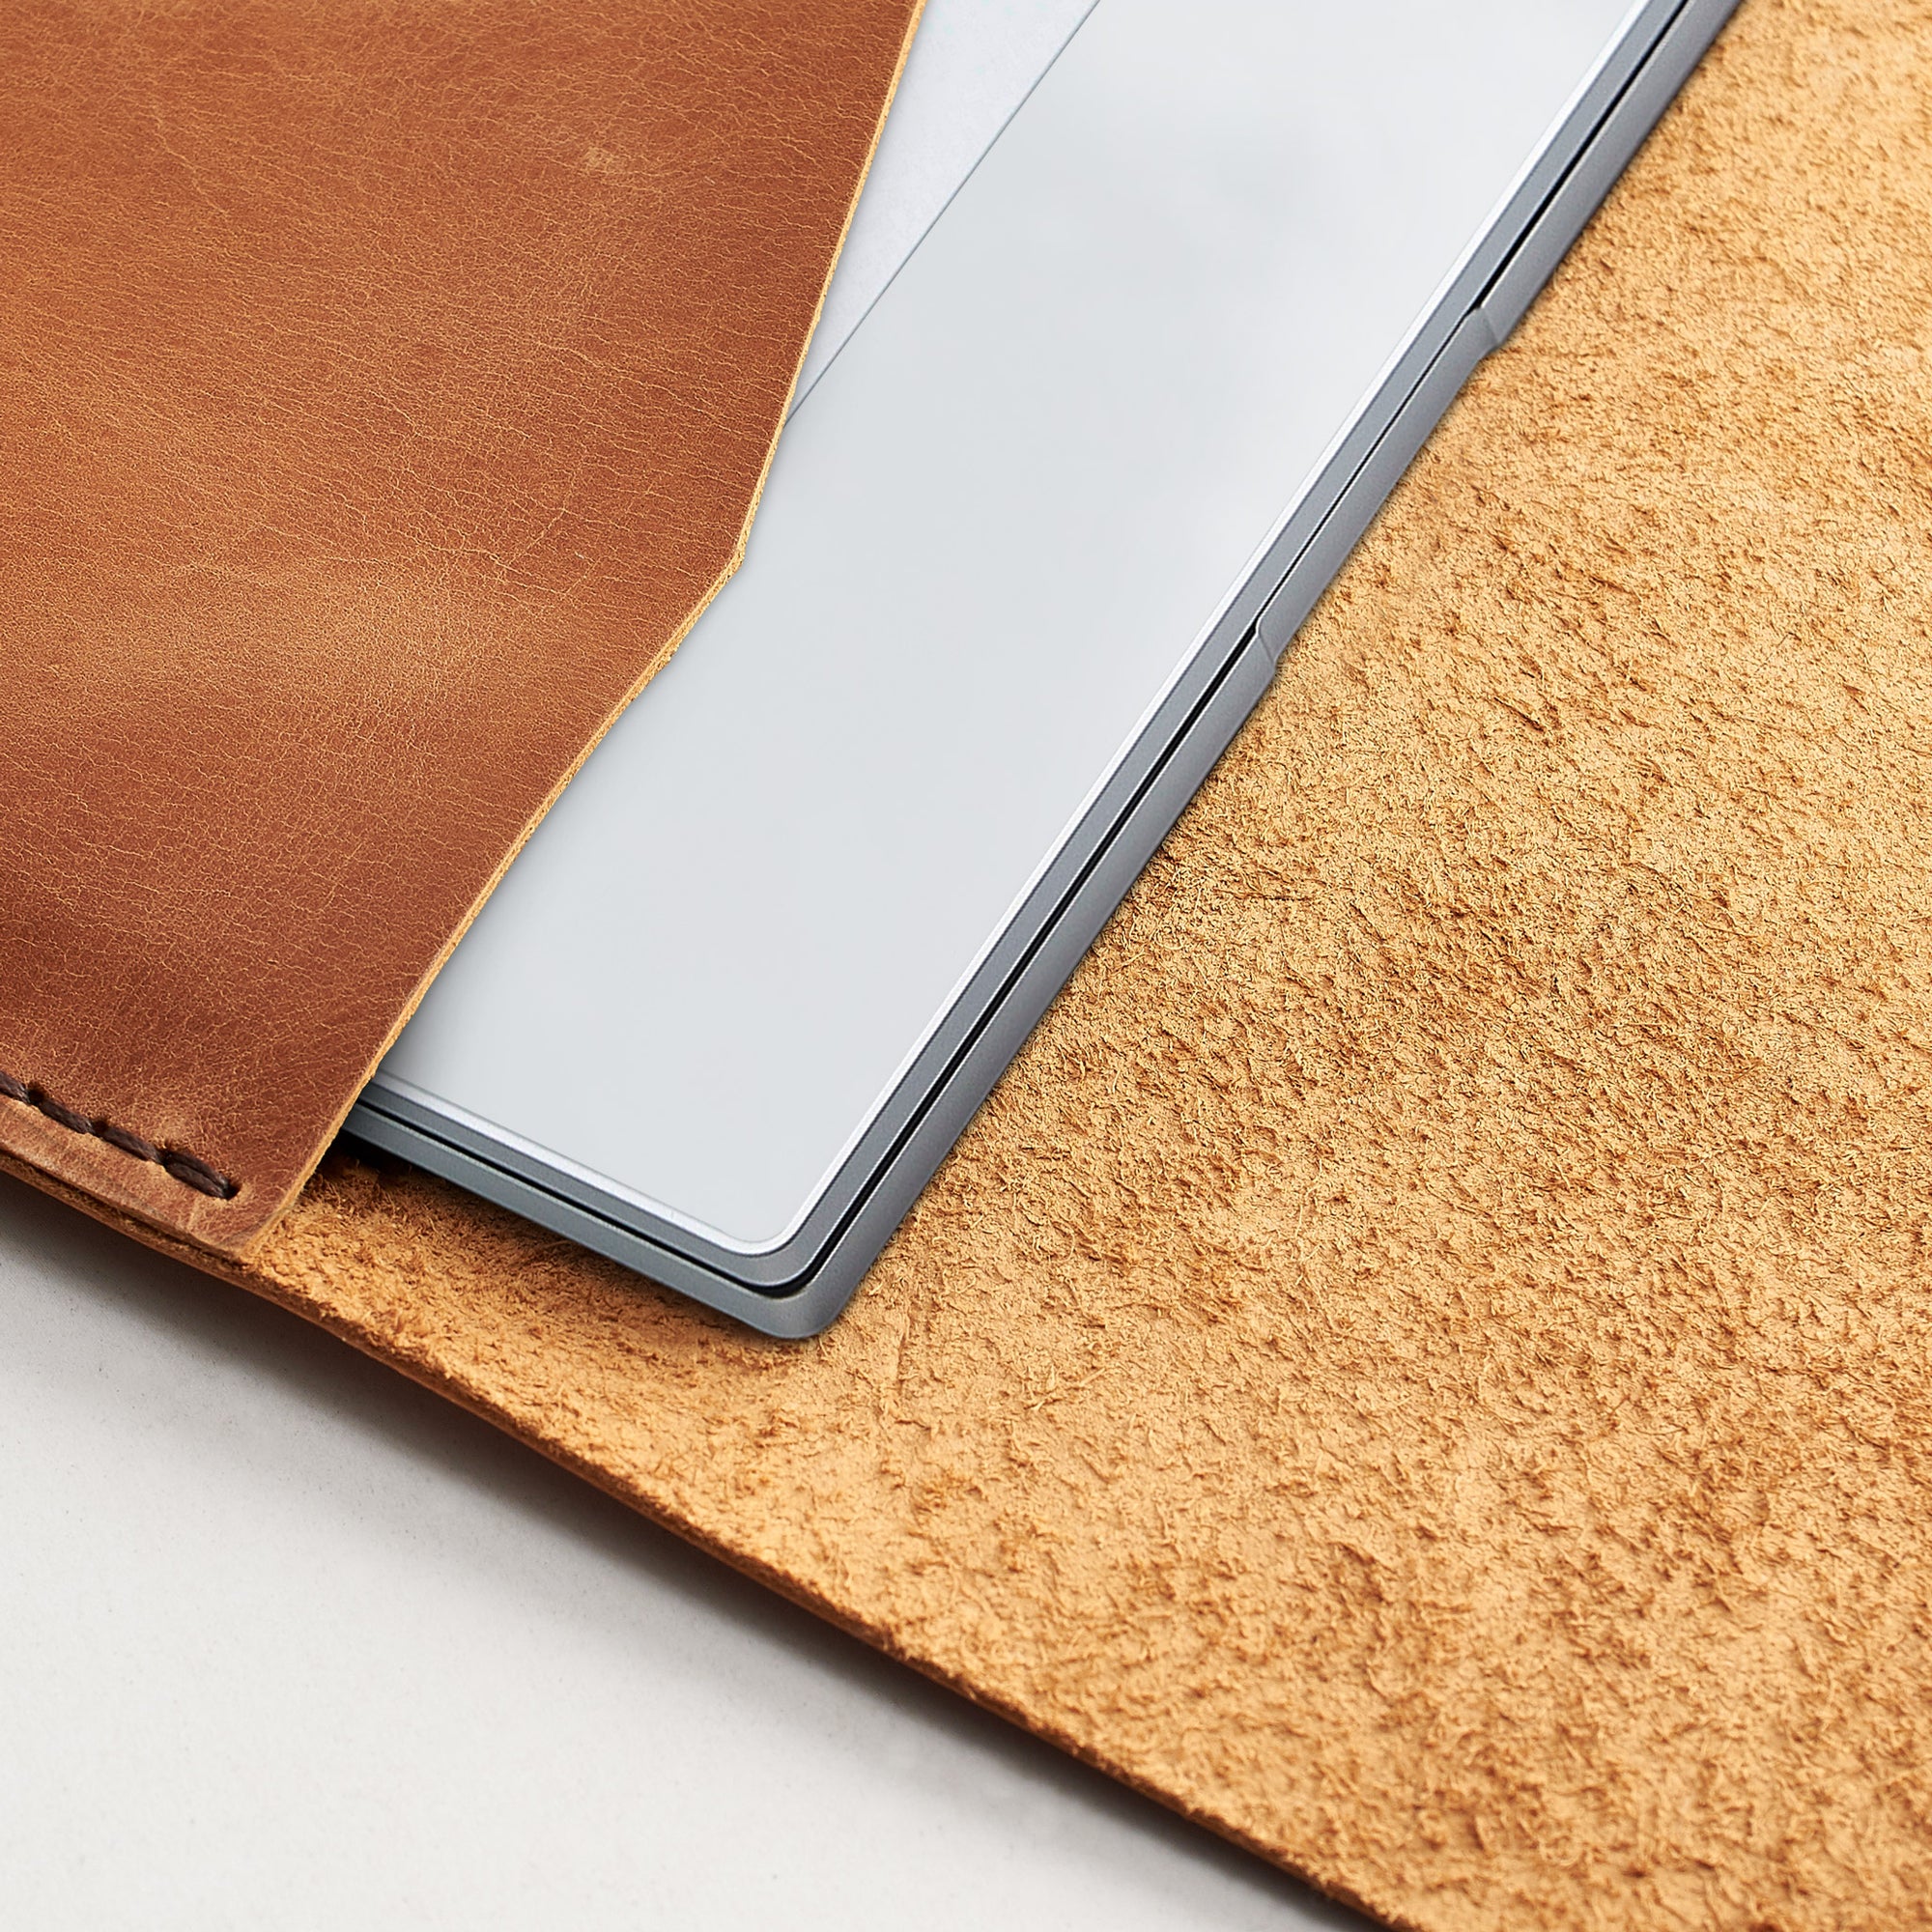 Soft interior. ASUS Zenbook Pro Duo light brown leather sleeve for men